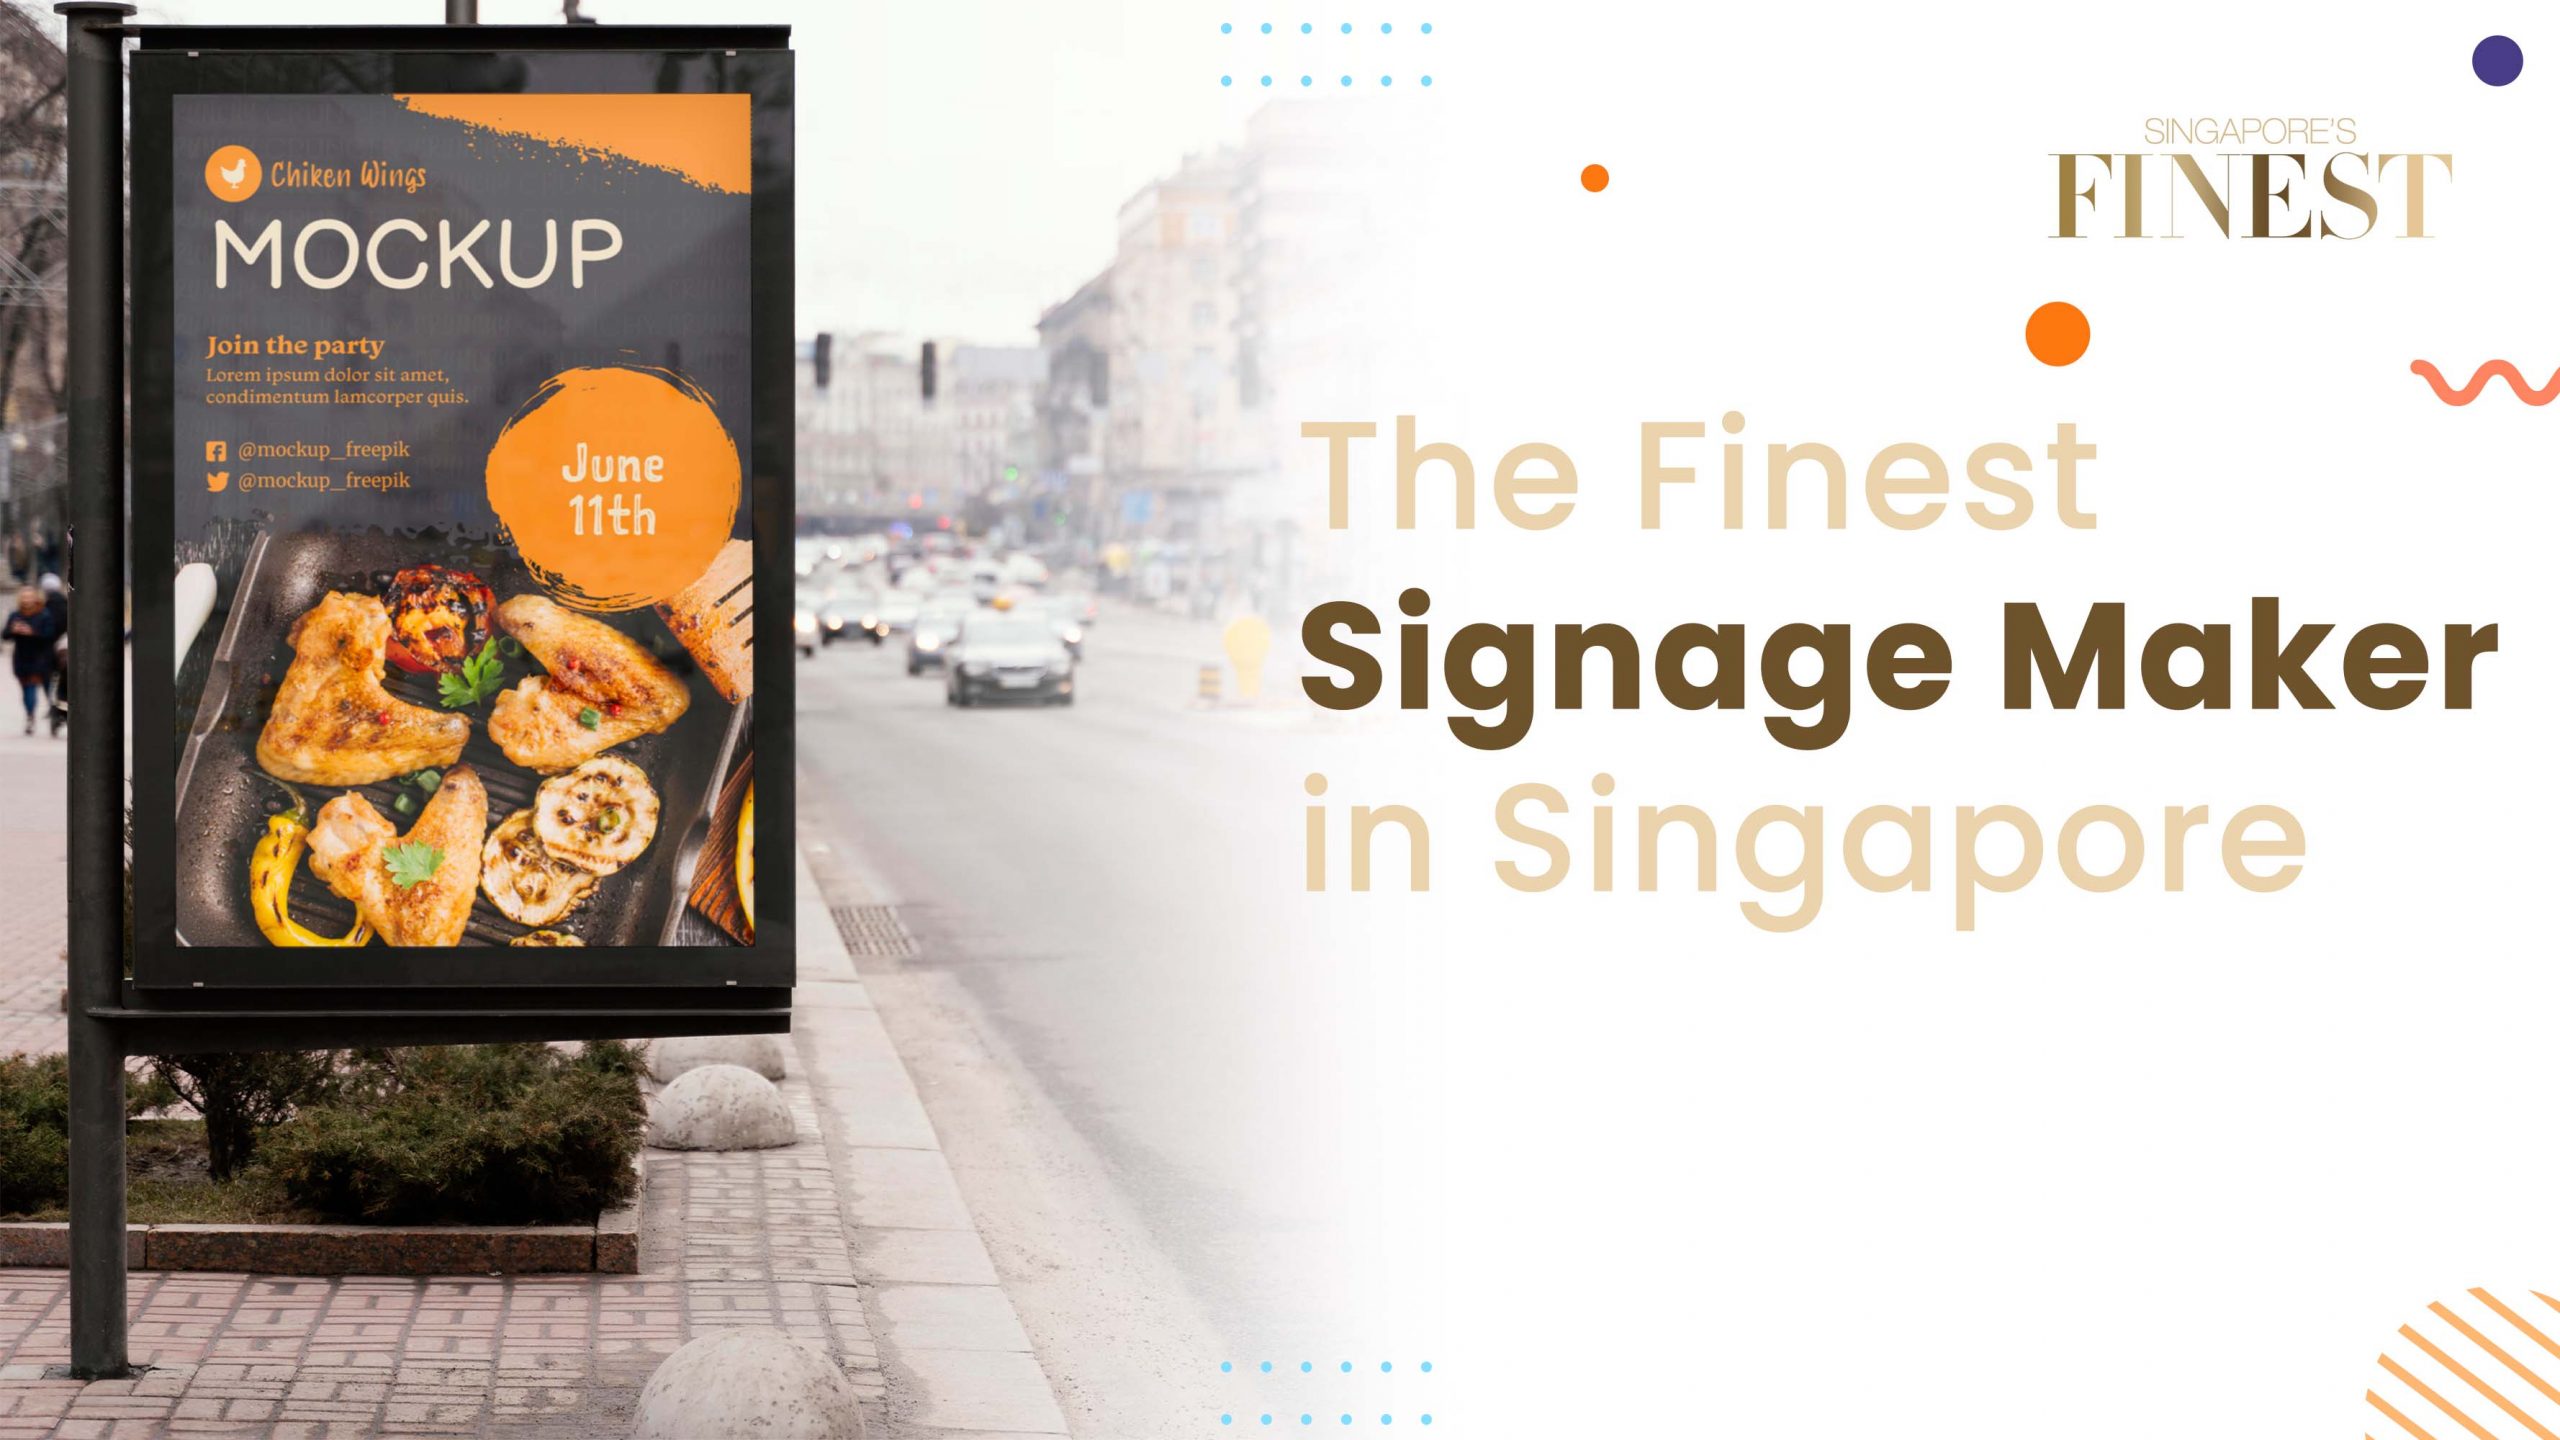 The Finest Signage Maker in Singapore